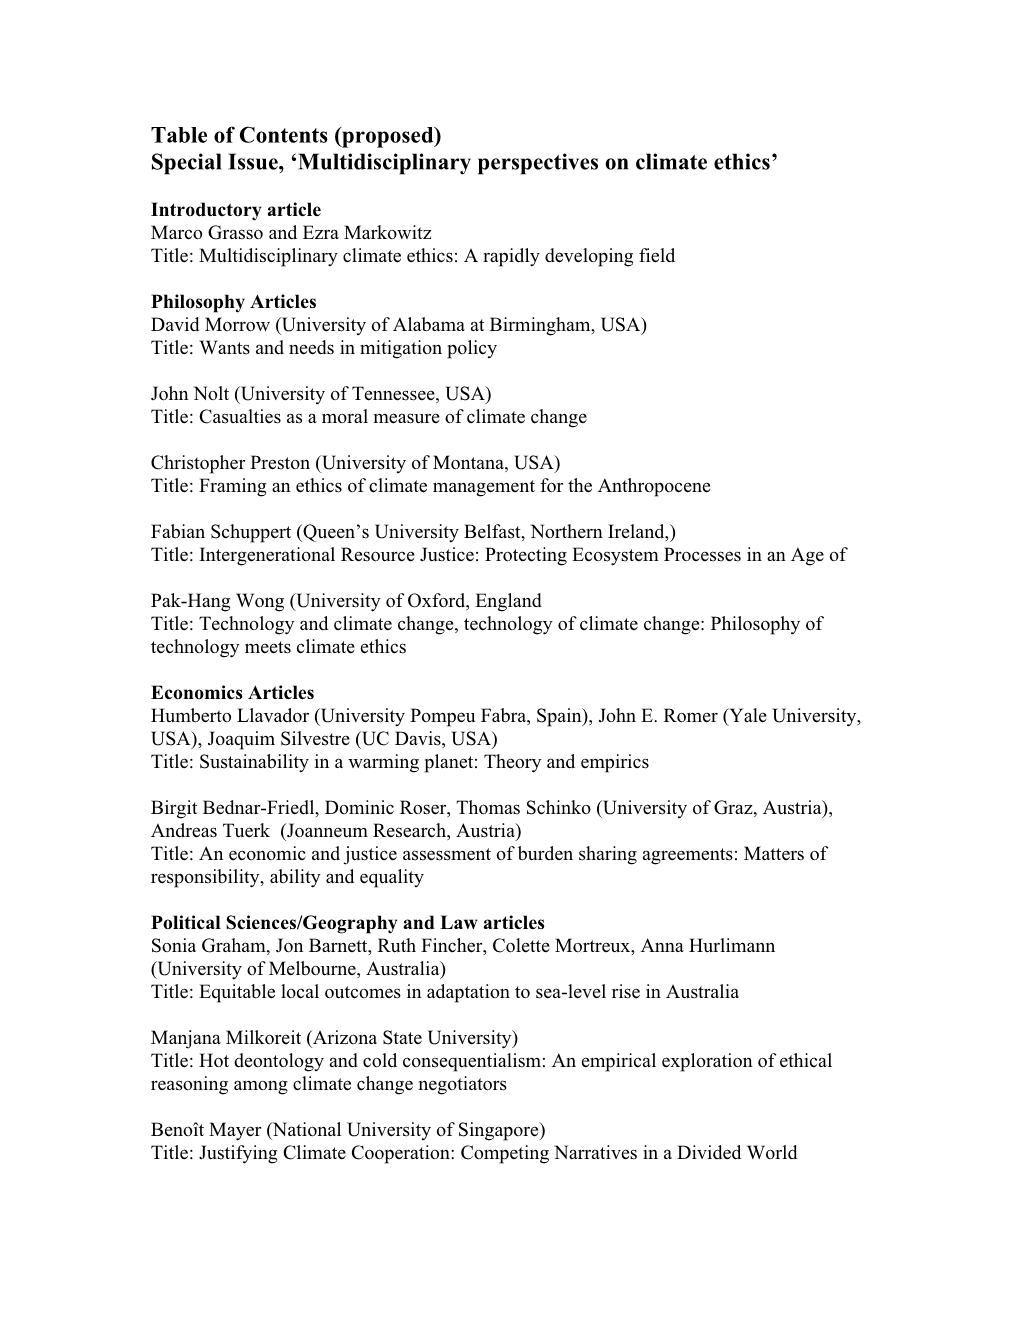 Special Issue, Multidisciplinary Perspectives on Climate Ethics